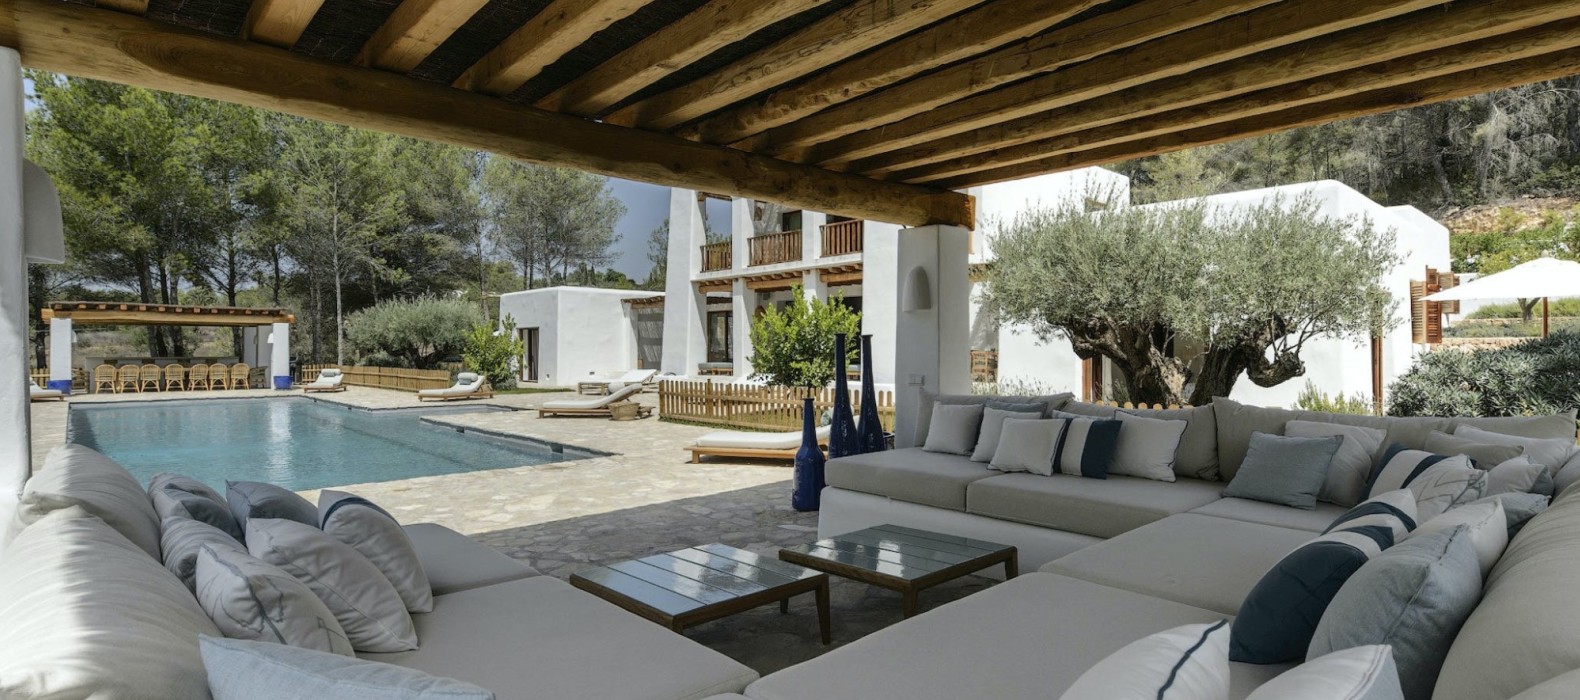 Exterior chill lounge next to the pool of Villa Blissful Life in Ibiza